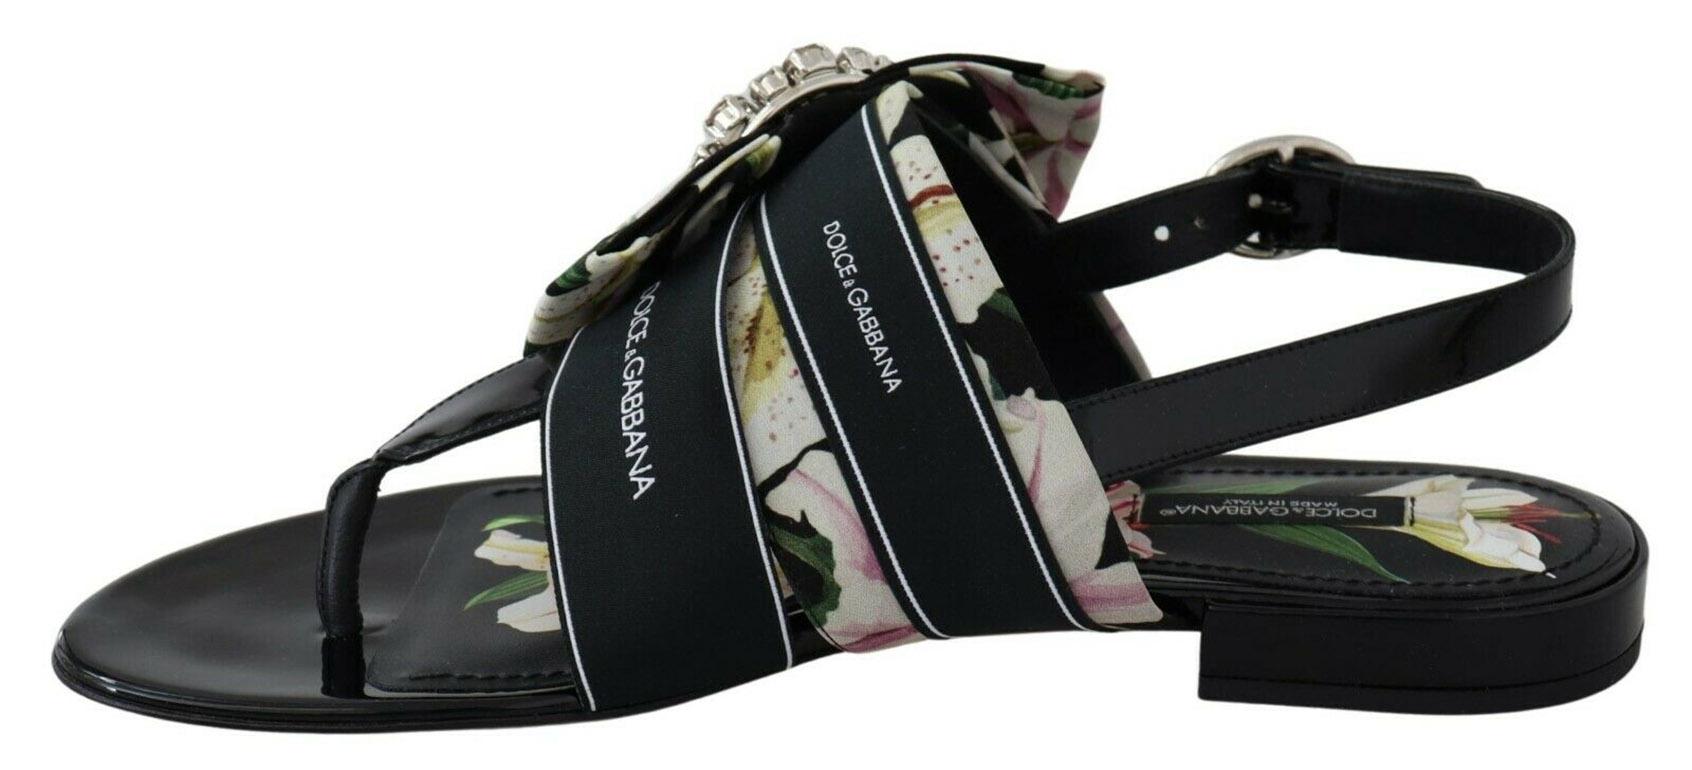 Gorgeous, brand new with tags

100% Authentic Dolce & Gabbana floral printed cady thong
sandals detailed with jewel buckle and
printed insole.

Model: Sandals flip flops heel strap
Flats
Color: Black with floral print
Material: 58% Silk 30%